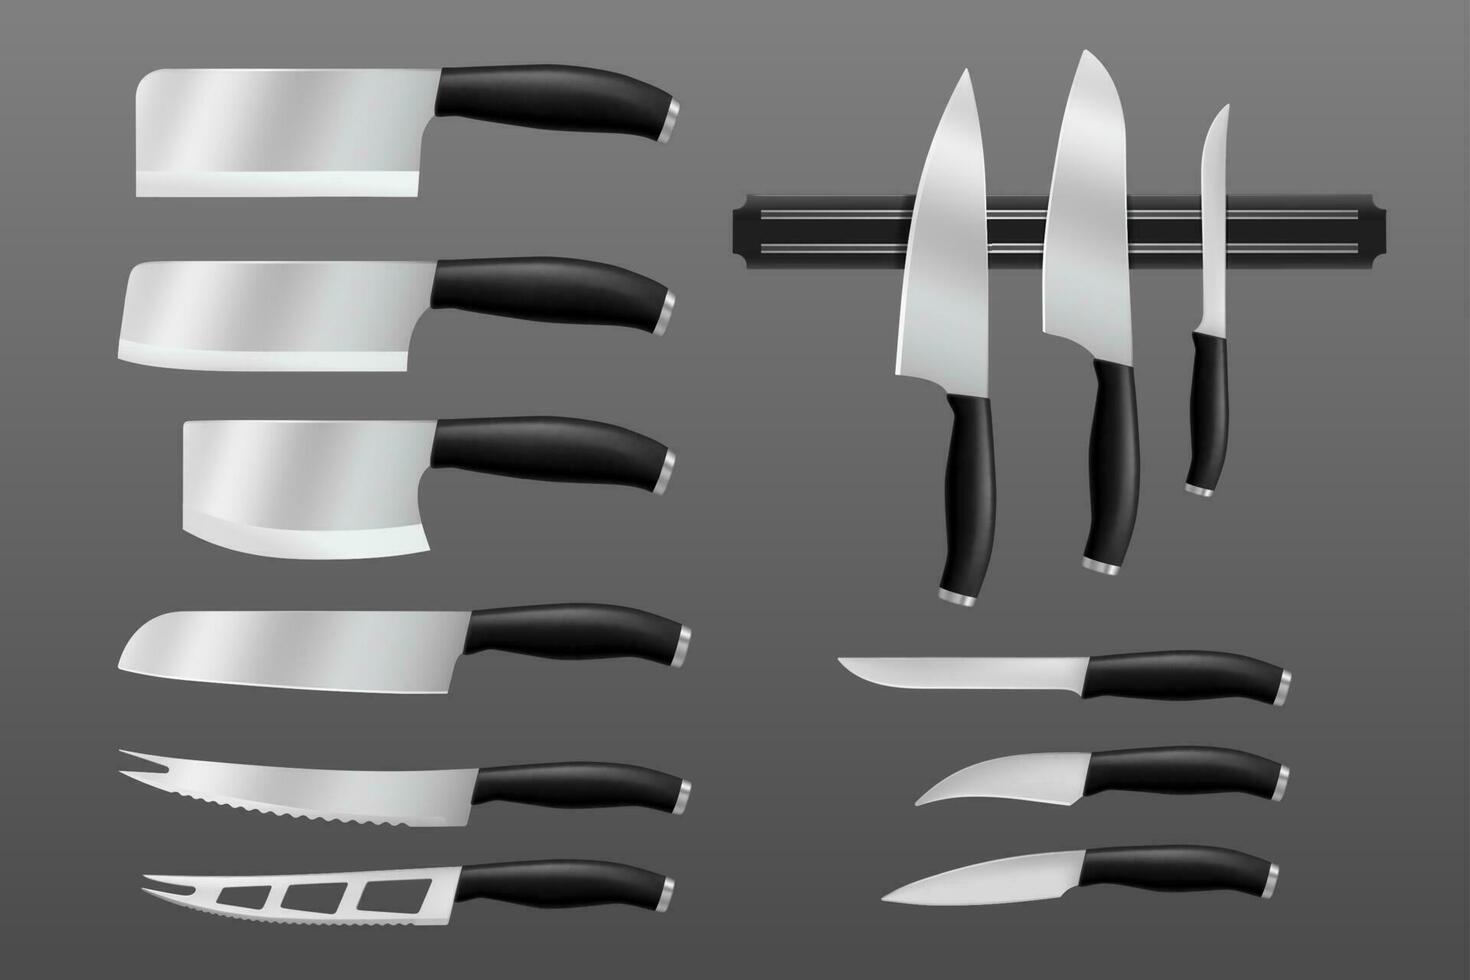 Kitchen cutlery, knifes and cutting kitchenware vector